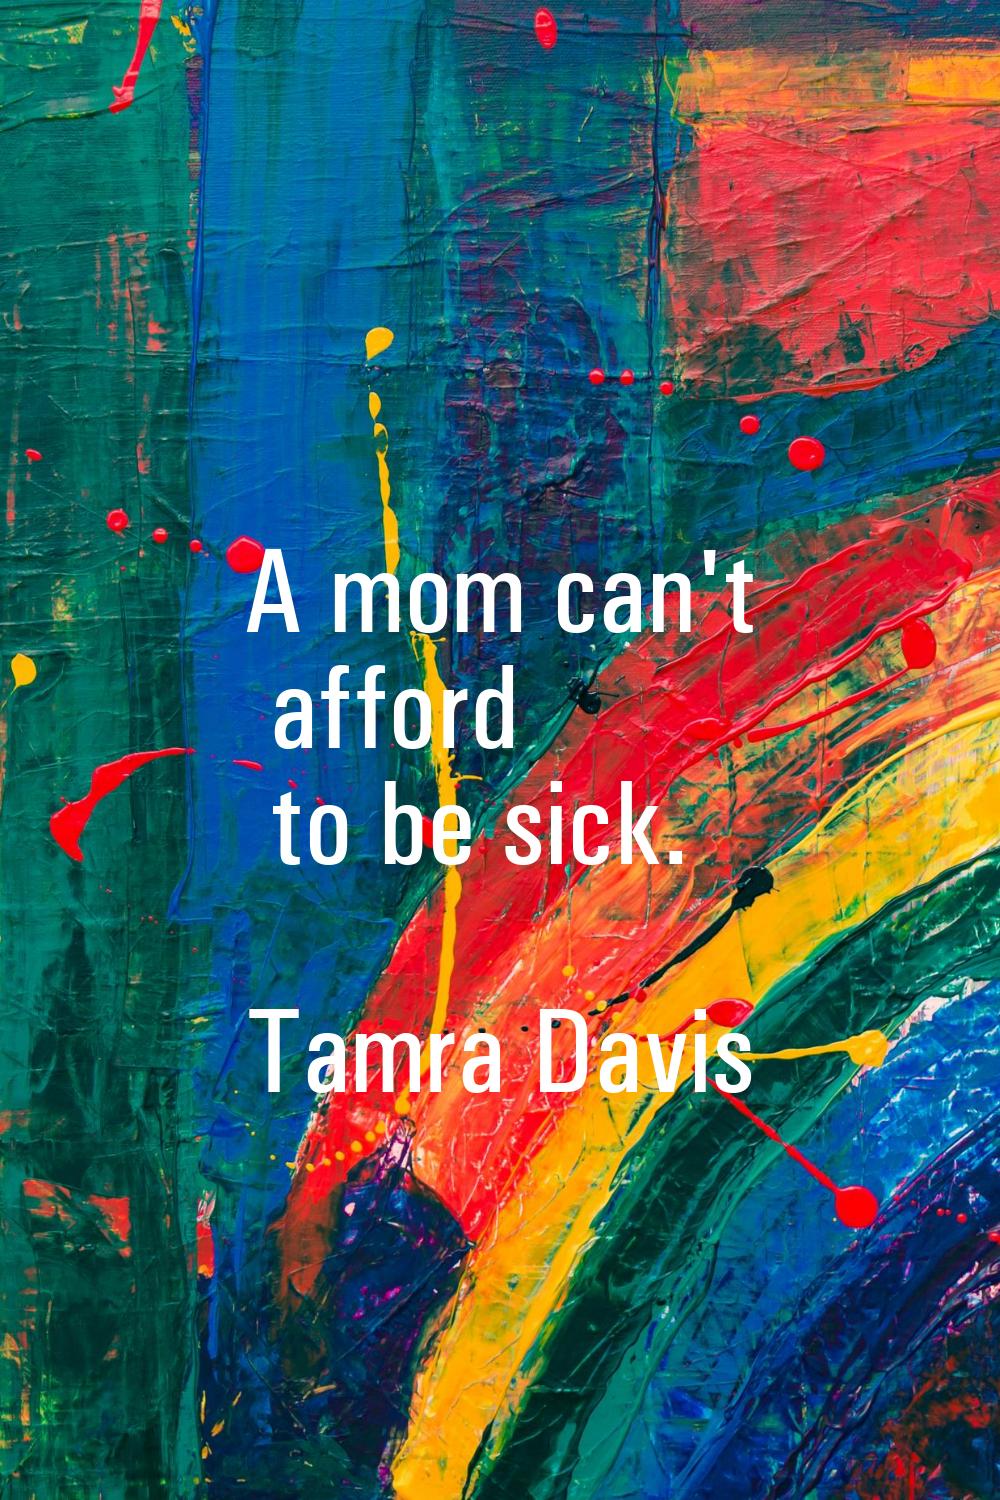 A mom can't afford to be sick.